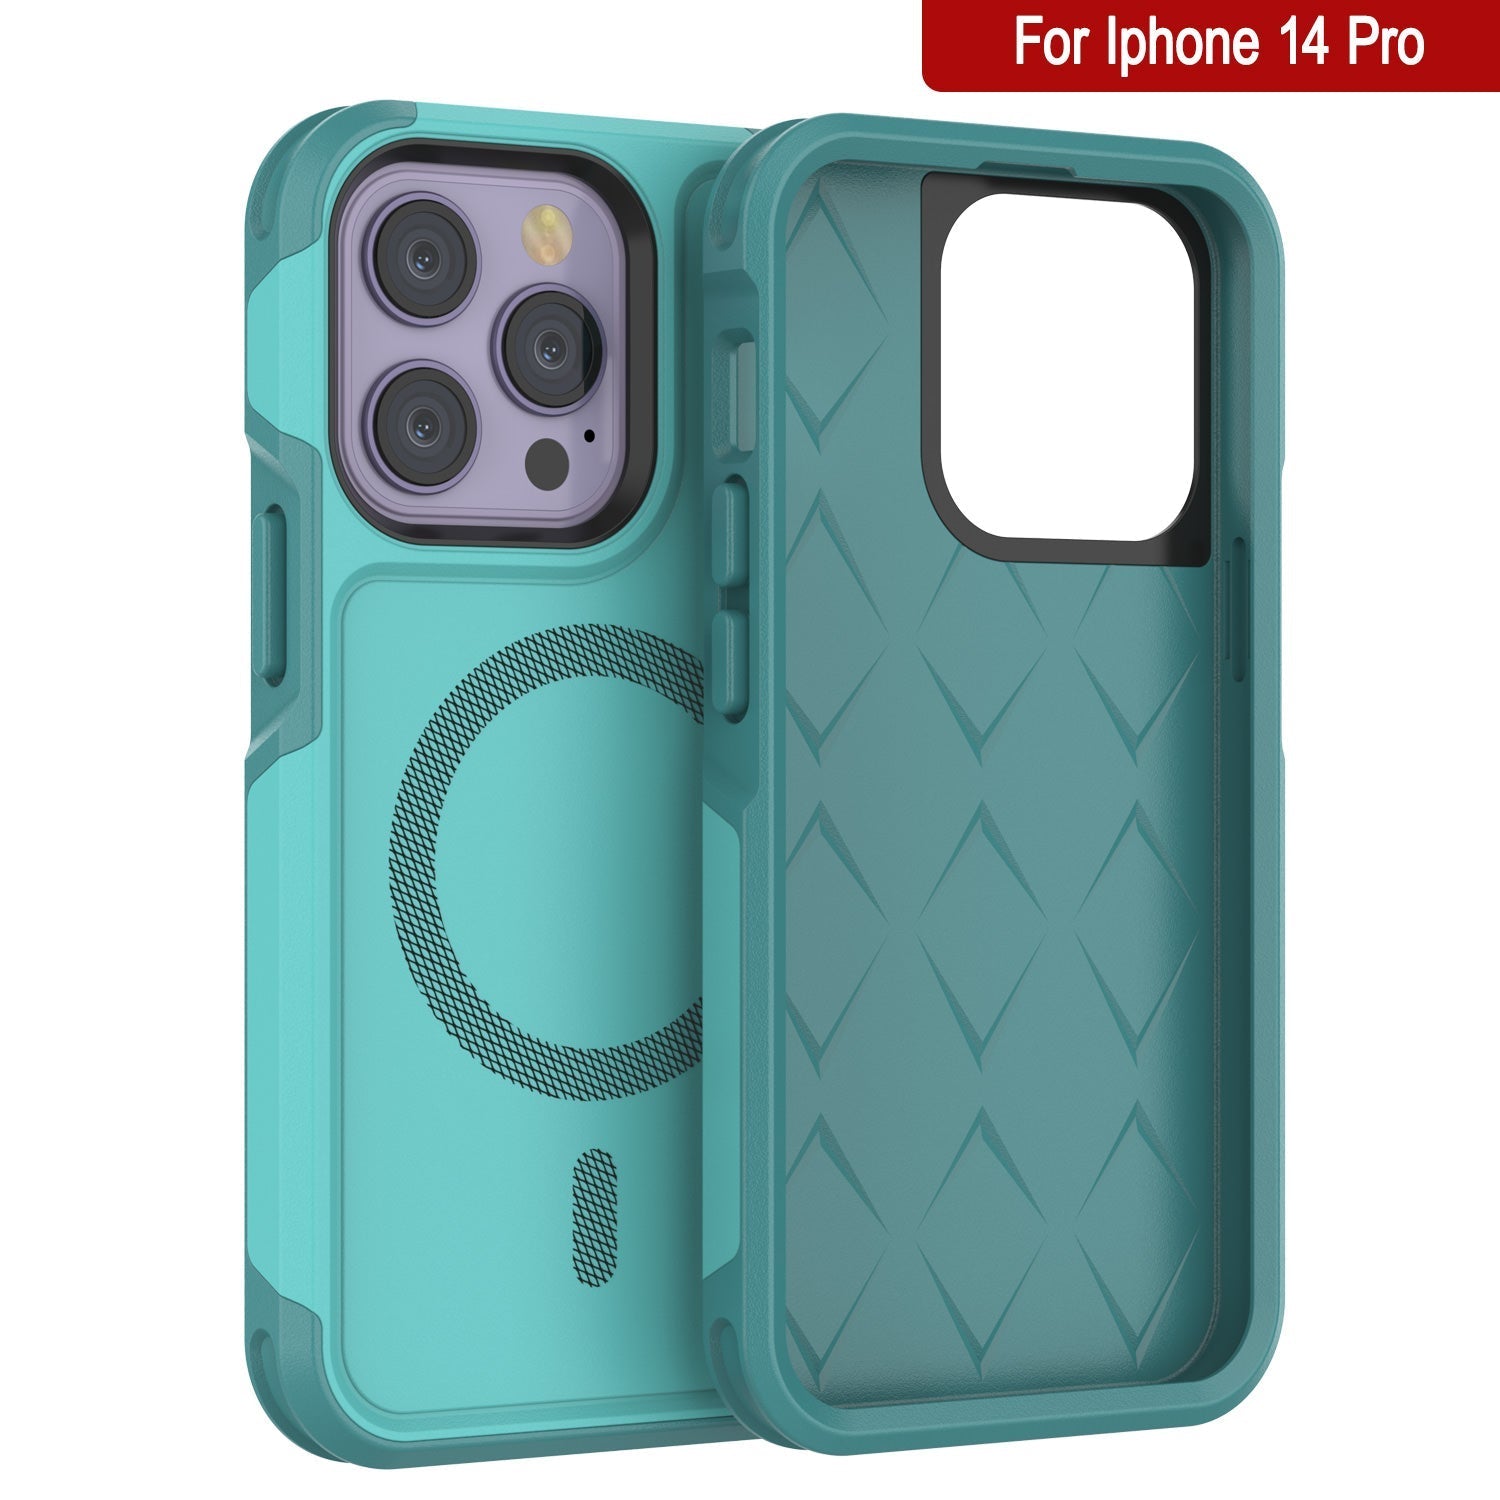 PunkCase iPhone 14 Pro Case, [Spartan 2.0 Series] Clear Rugged Heavy Duty Cover W/Built in Screen Protector [Blue]